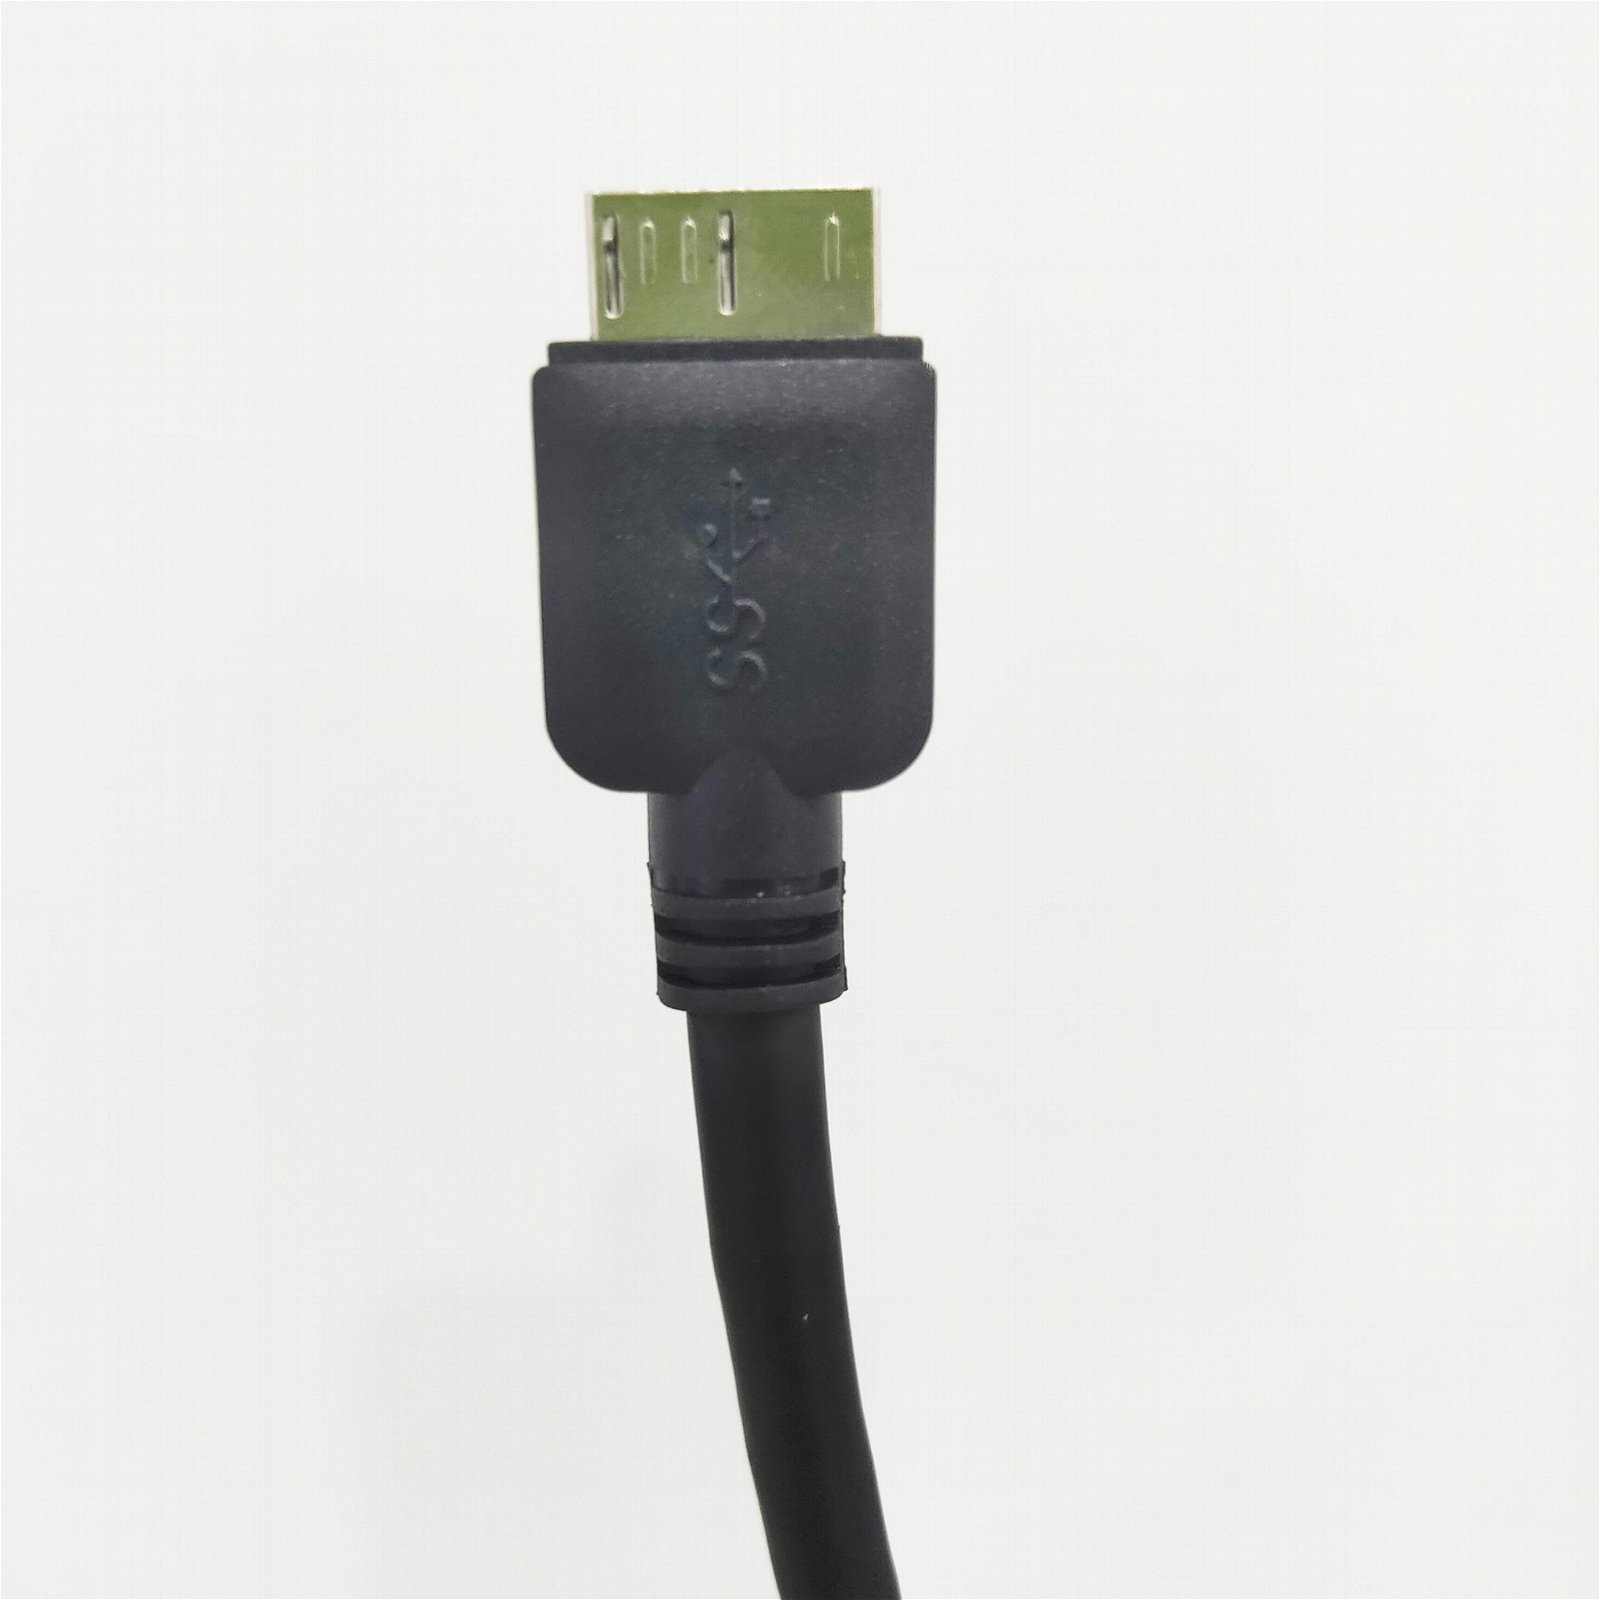 Data usb cable USB 3.0 A male to micro B male cable for HDD Micro charger cable 3